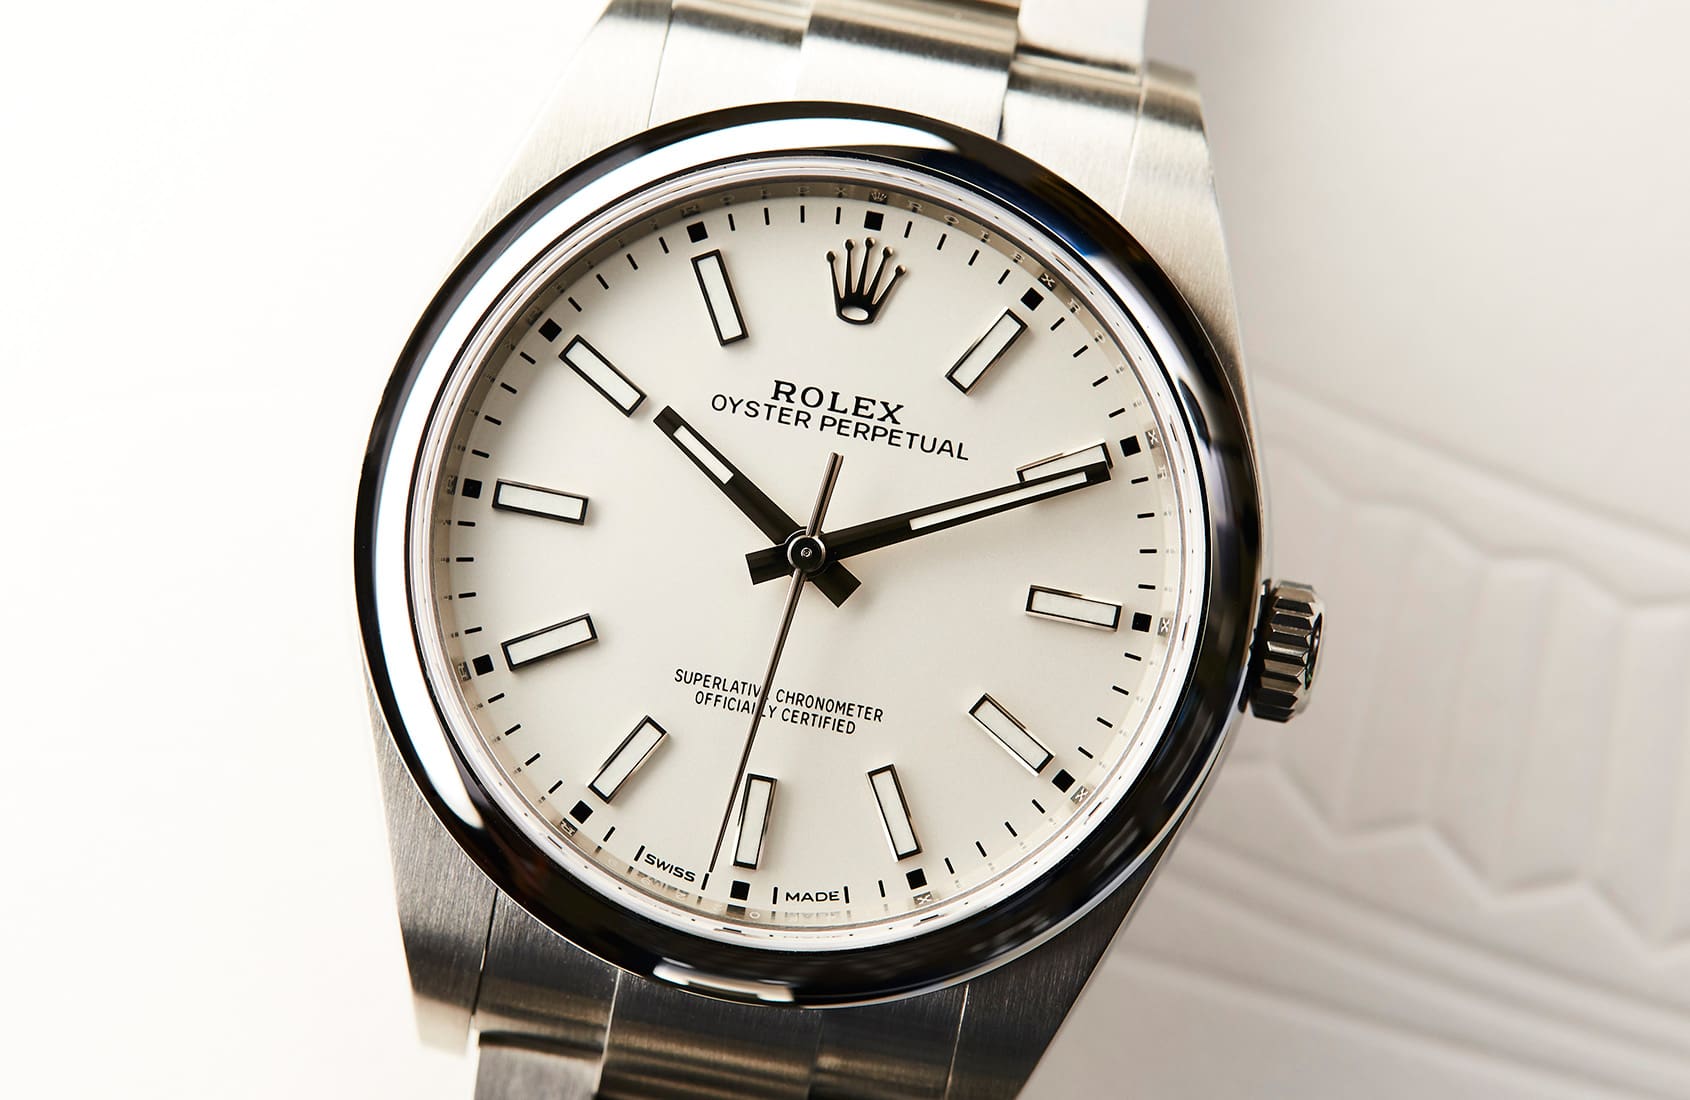 My week with the Rolex Oyster Perpetual 39